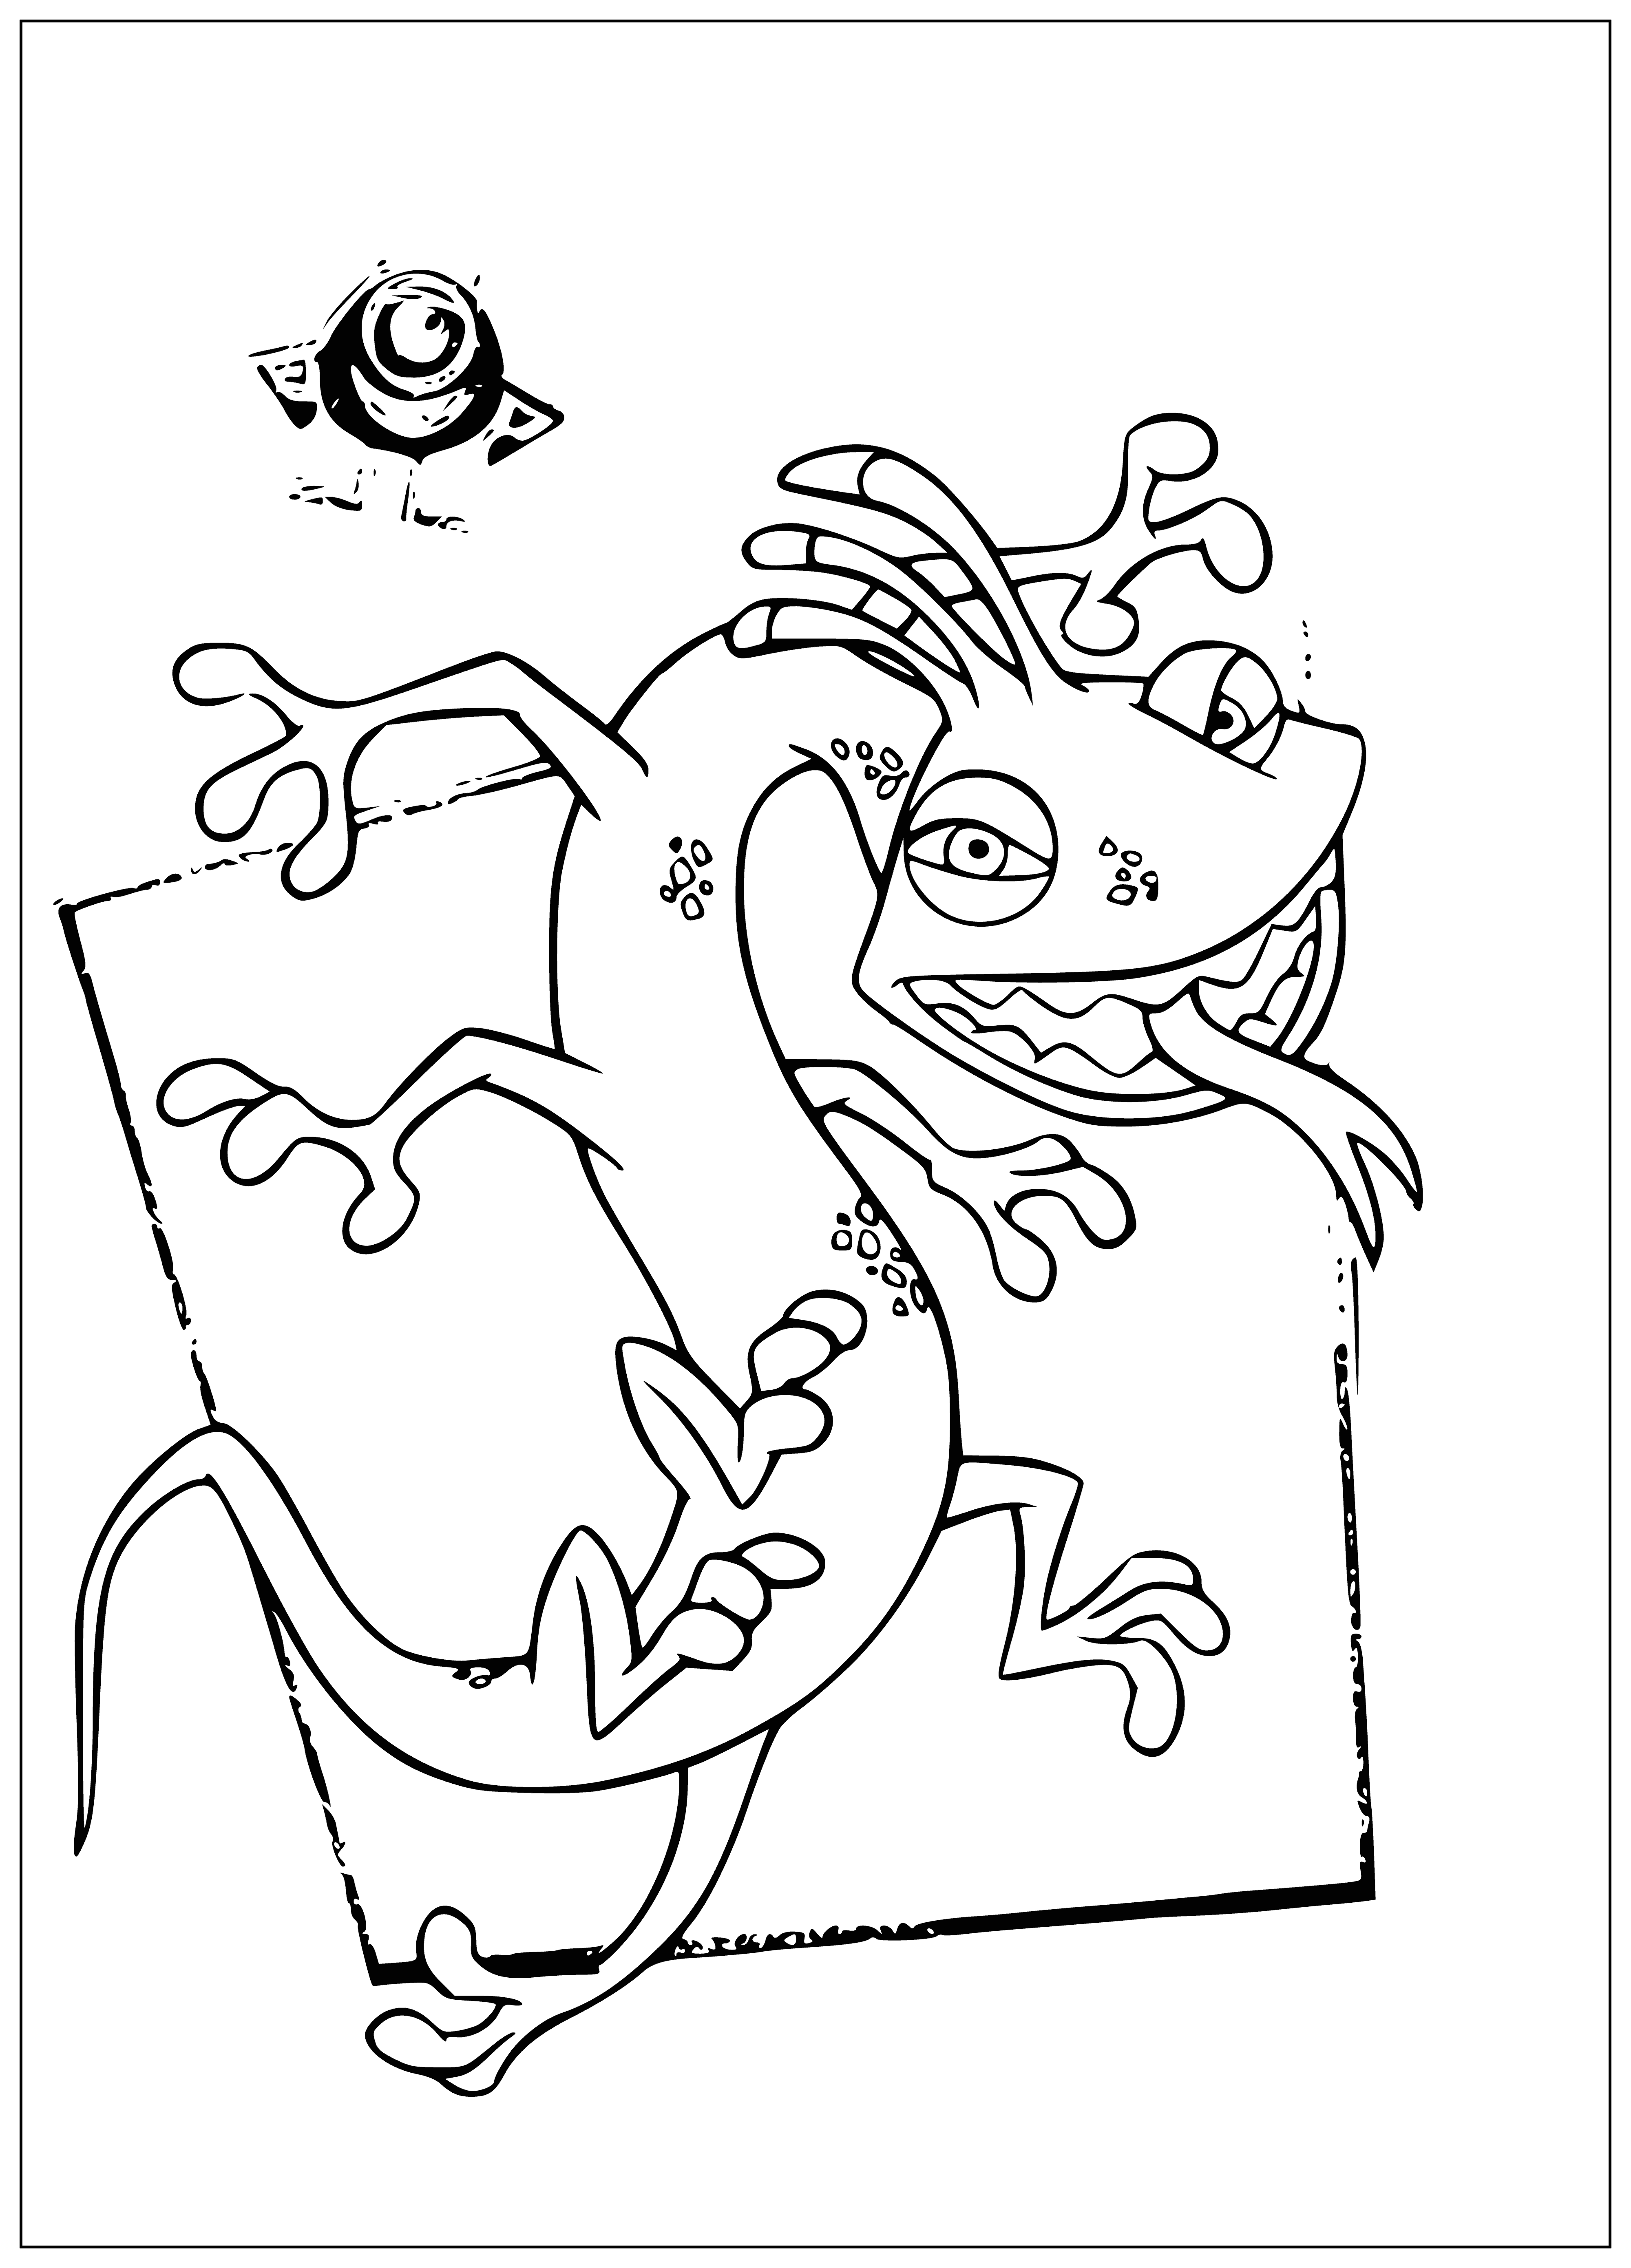 Mischievous Randall coloring page